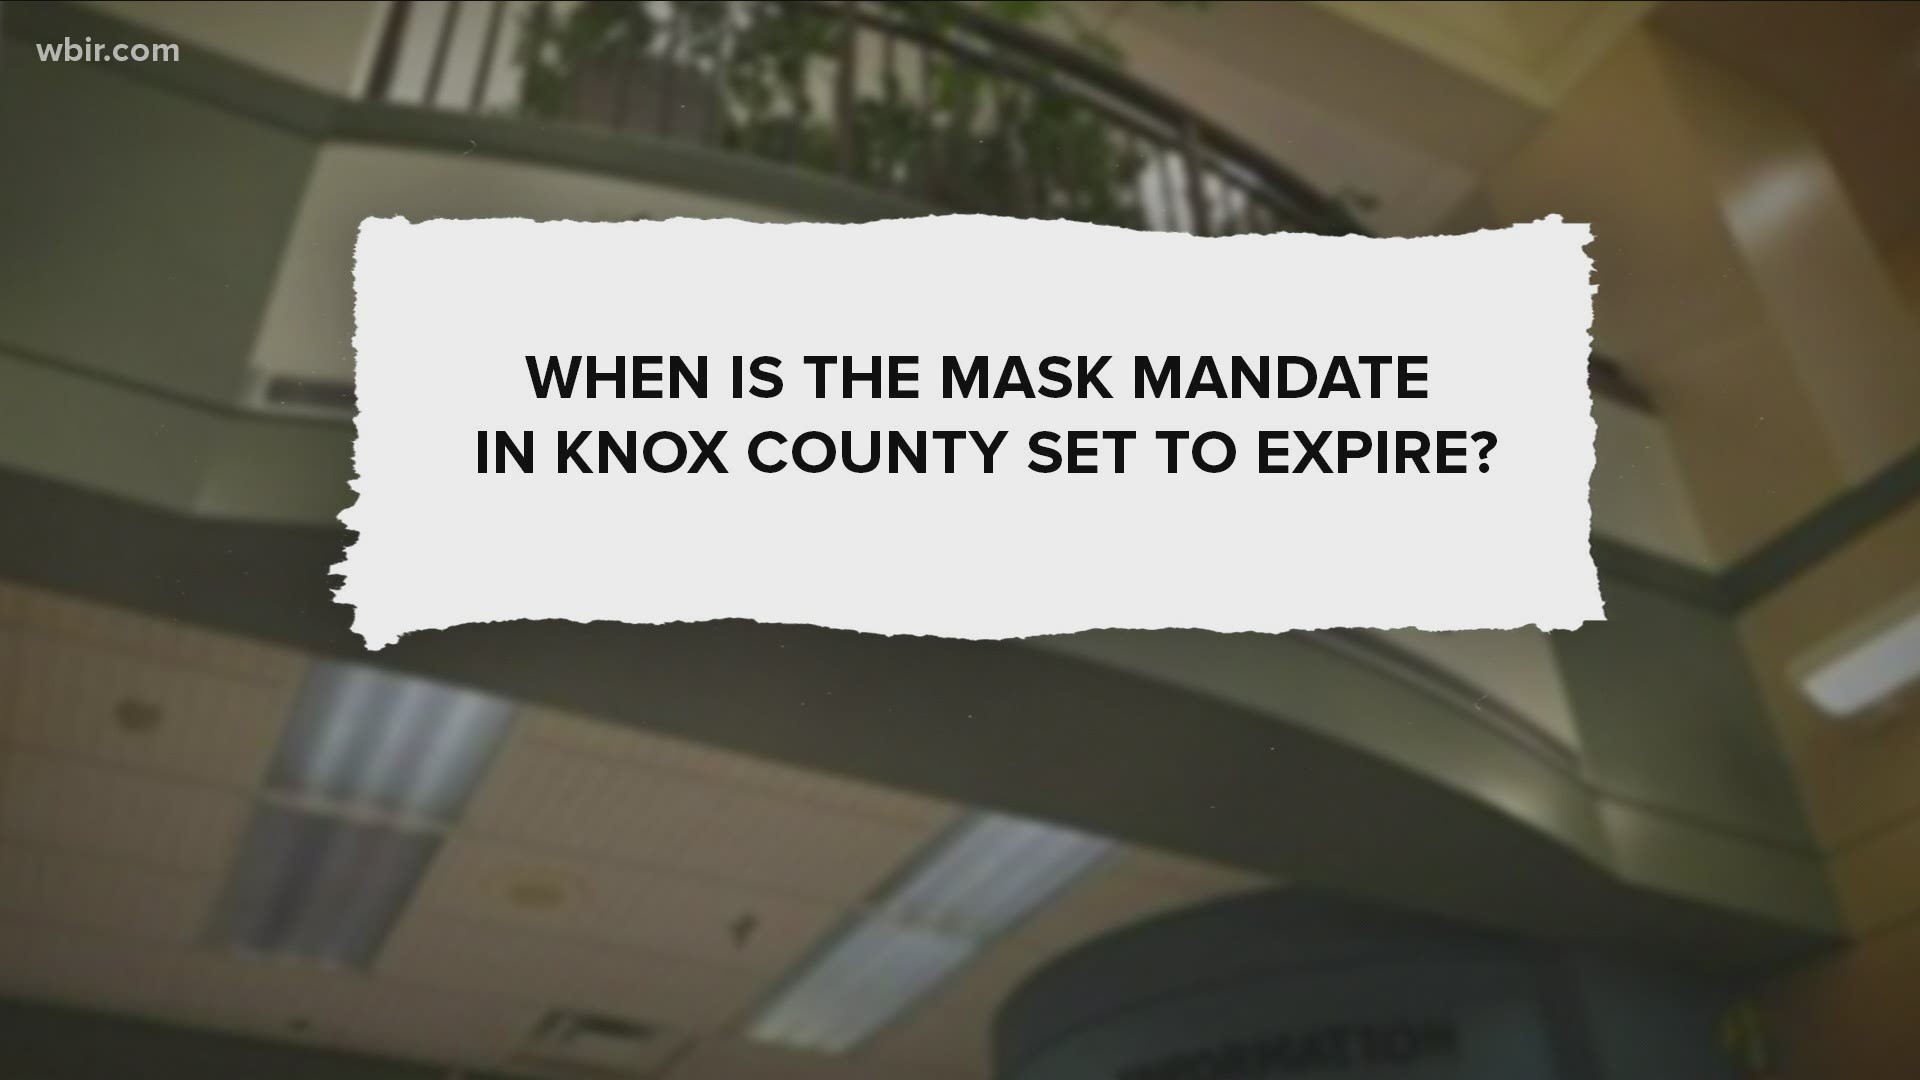 FOR THE LAST TWO AND HALF MONTHS, MASKS HAVE BEEN MANDATORY IN MOST INDOOR PUBLIC SPACES. AND THE KNOX COUNTY ORDINANCE DOESN'T HAVE AN END DATE.